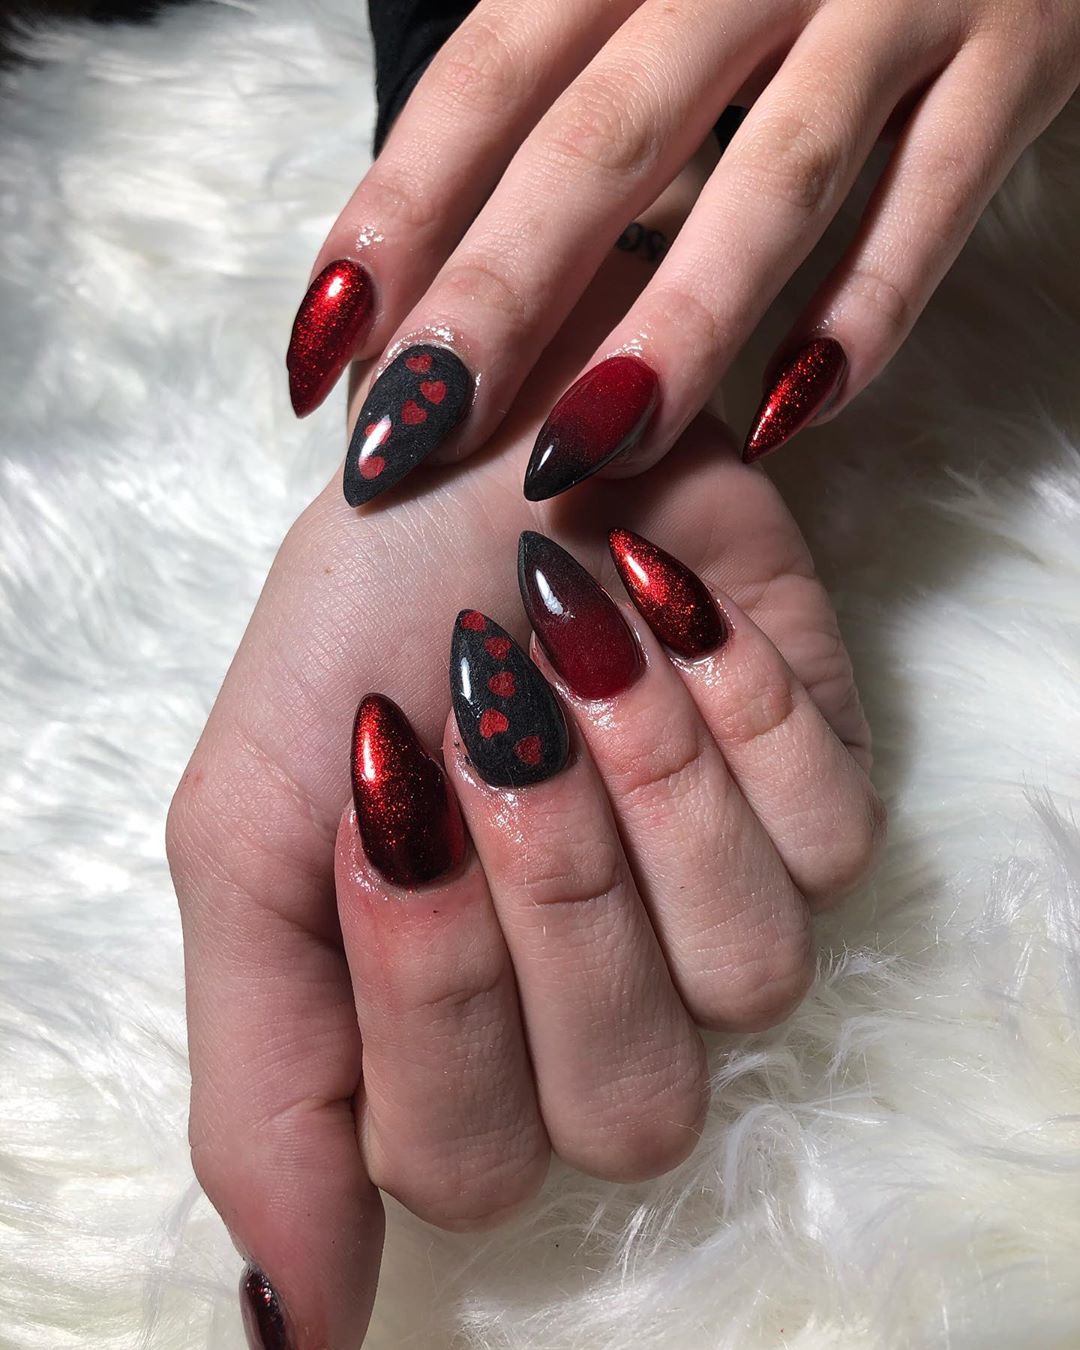 Updated] 35 Stunning Red And Black Ombre Nails